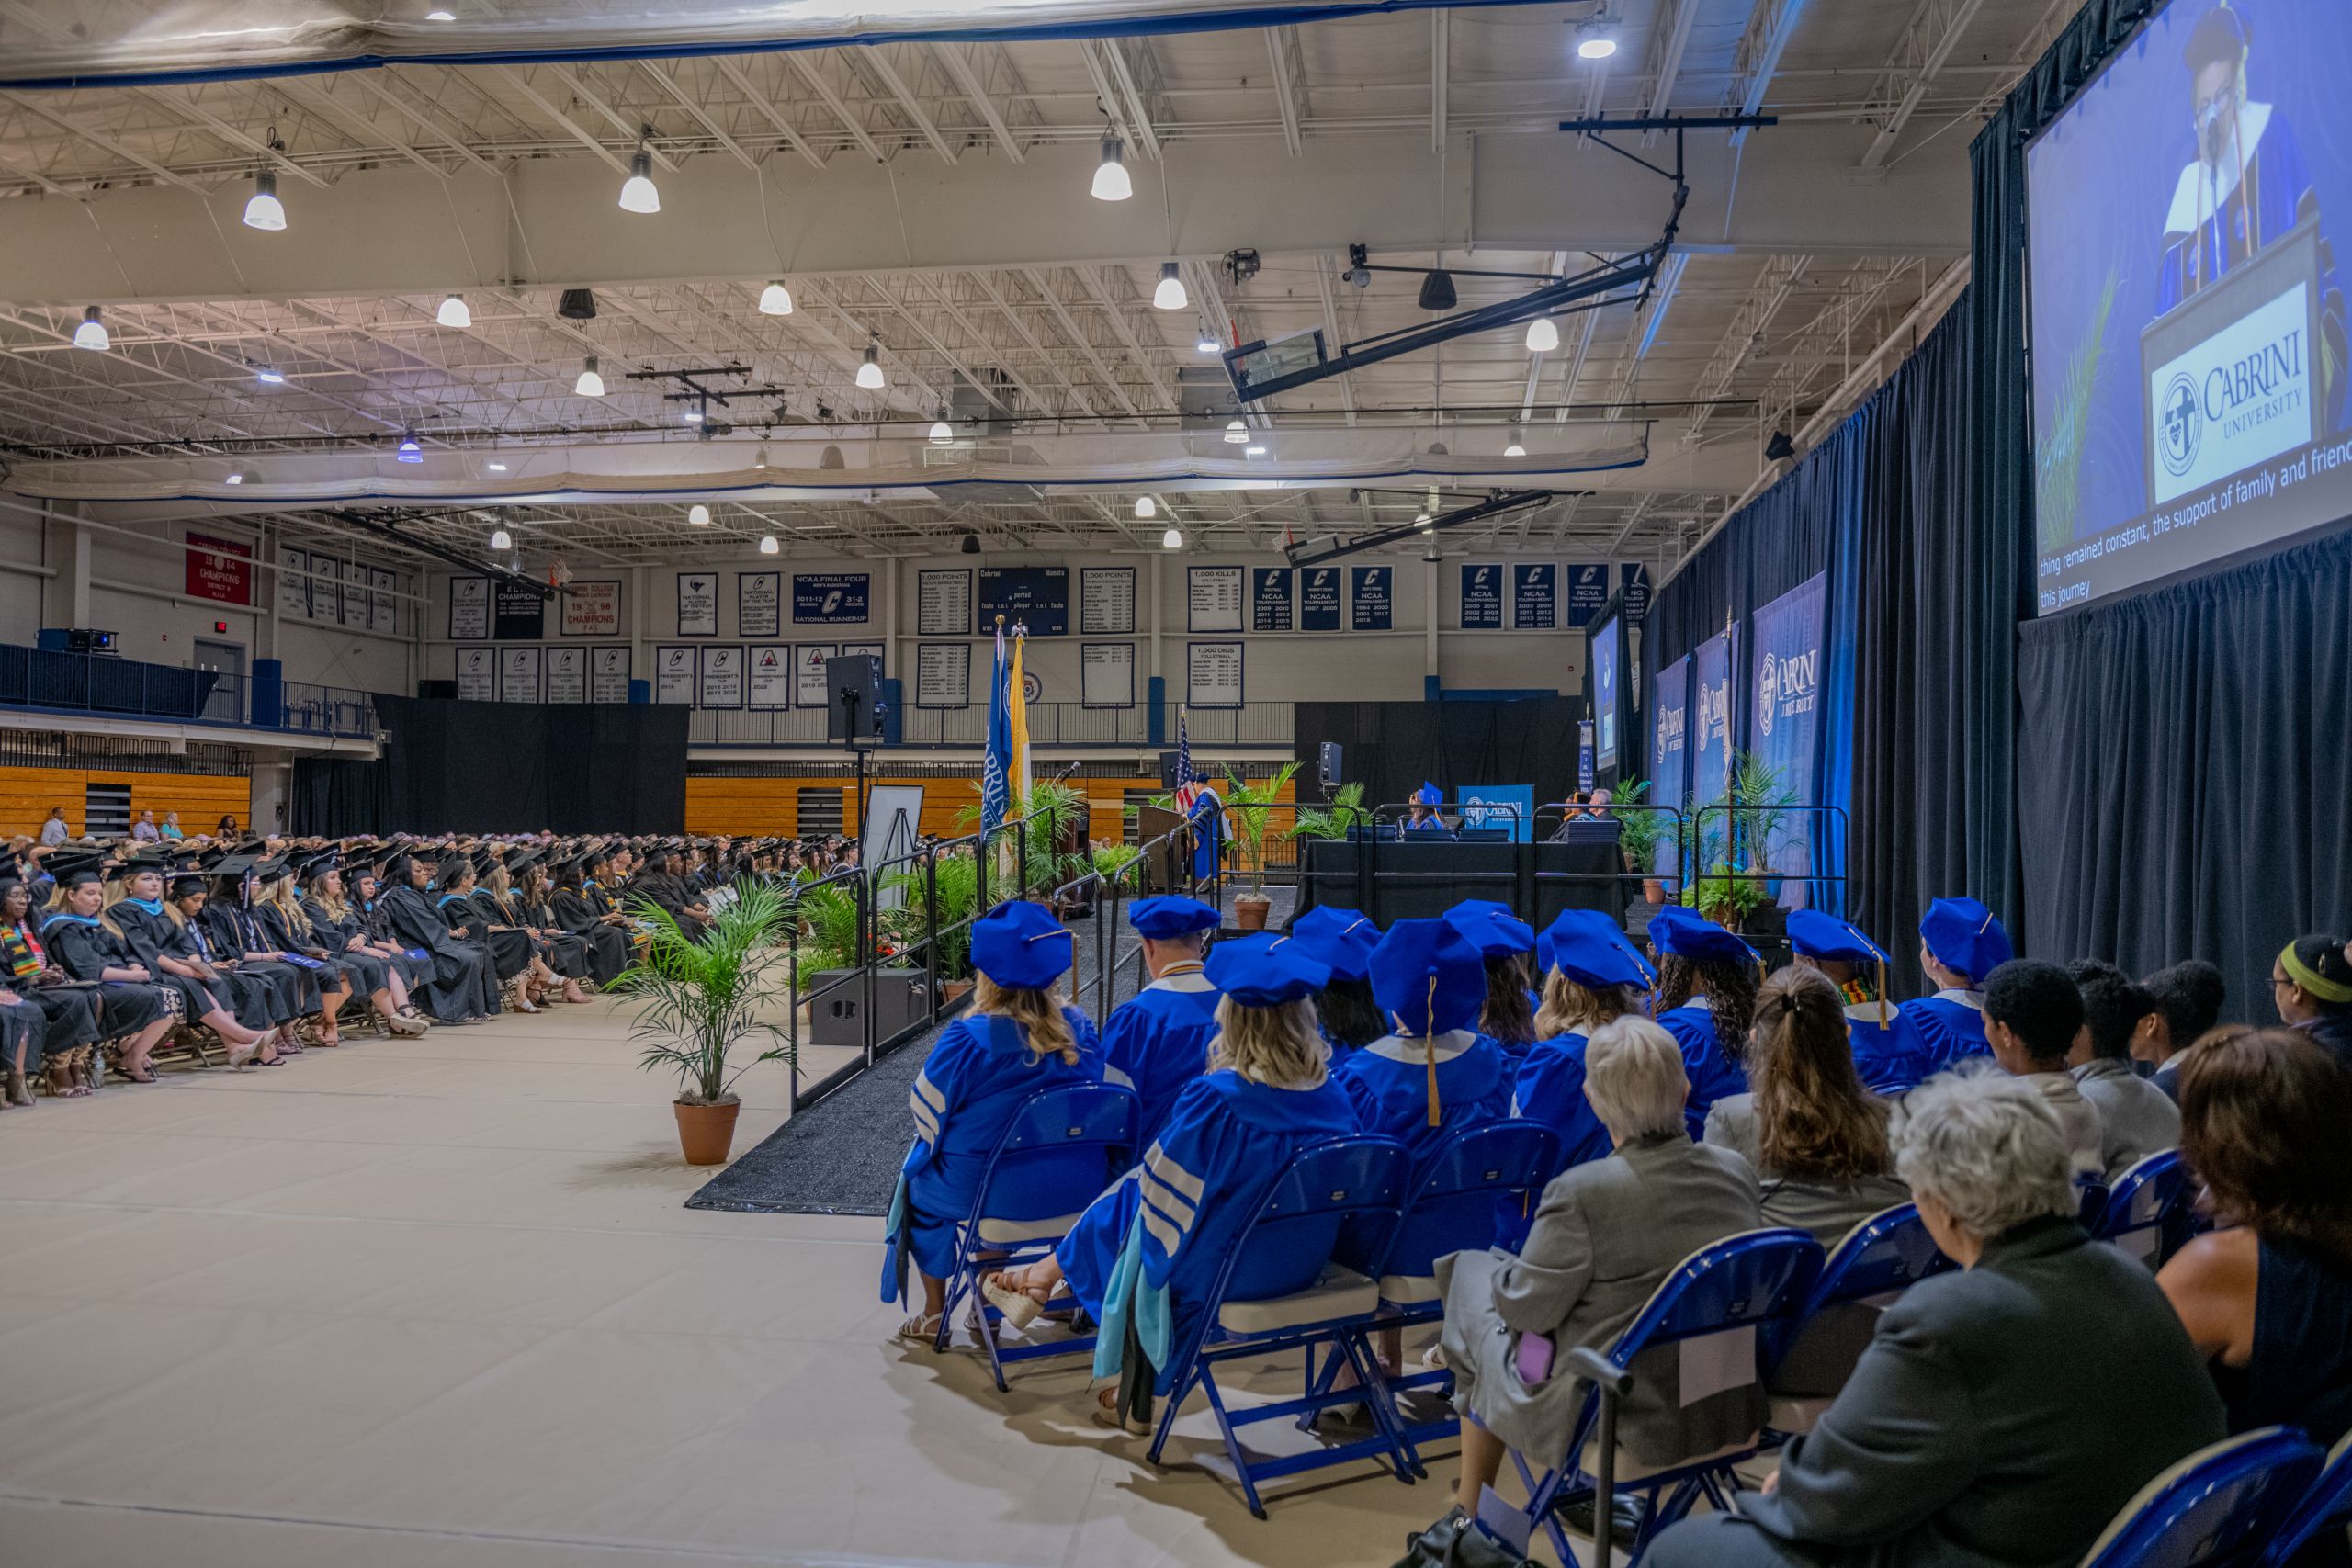 President Helen Drinan speaks to the crowd at Cabrini's 63rd Commencement Ceremony on May 21, 2023. Cabrini will hold it's final Commencement for the class of 2024 on May 19, 2024. Photo by Cabrini University via Flickr.